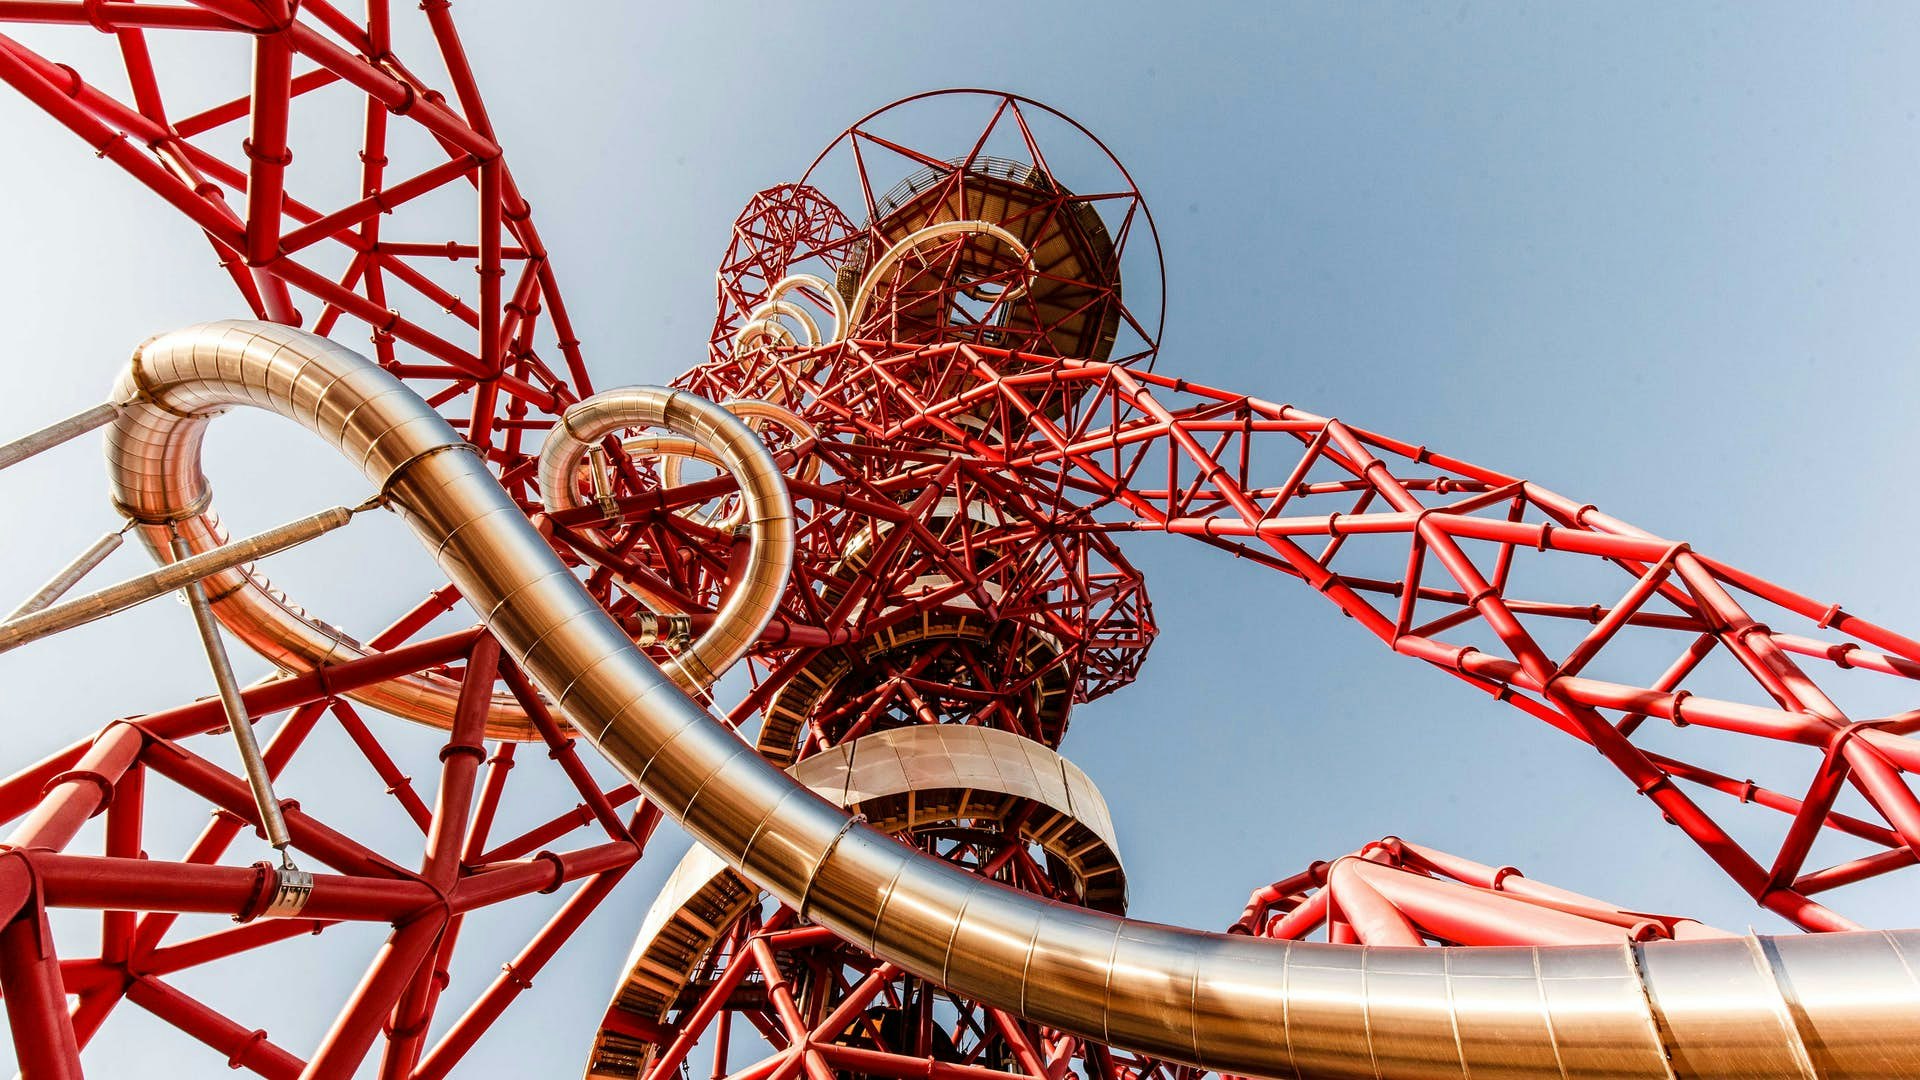 ArcelorMittal Orbit's structure and slide